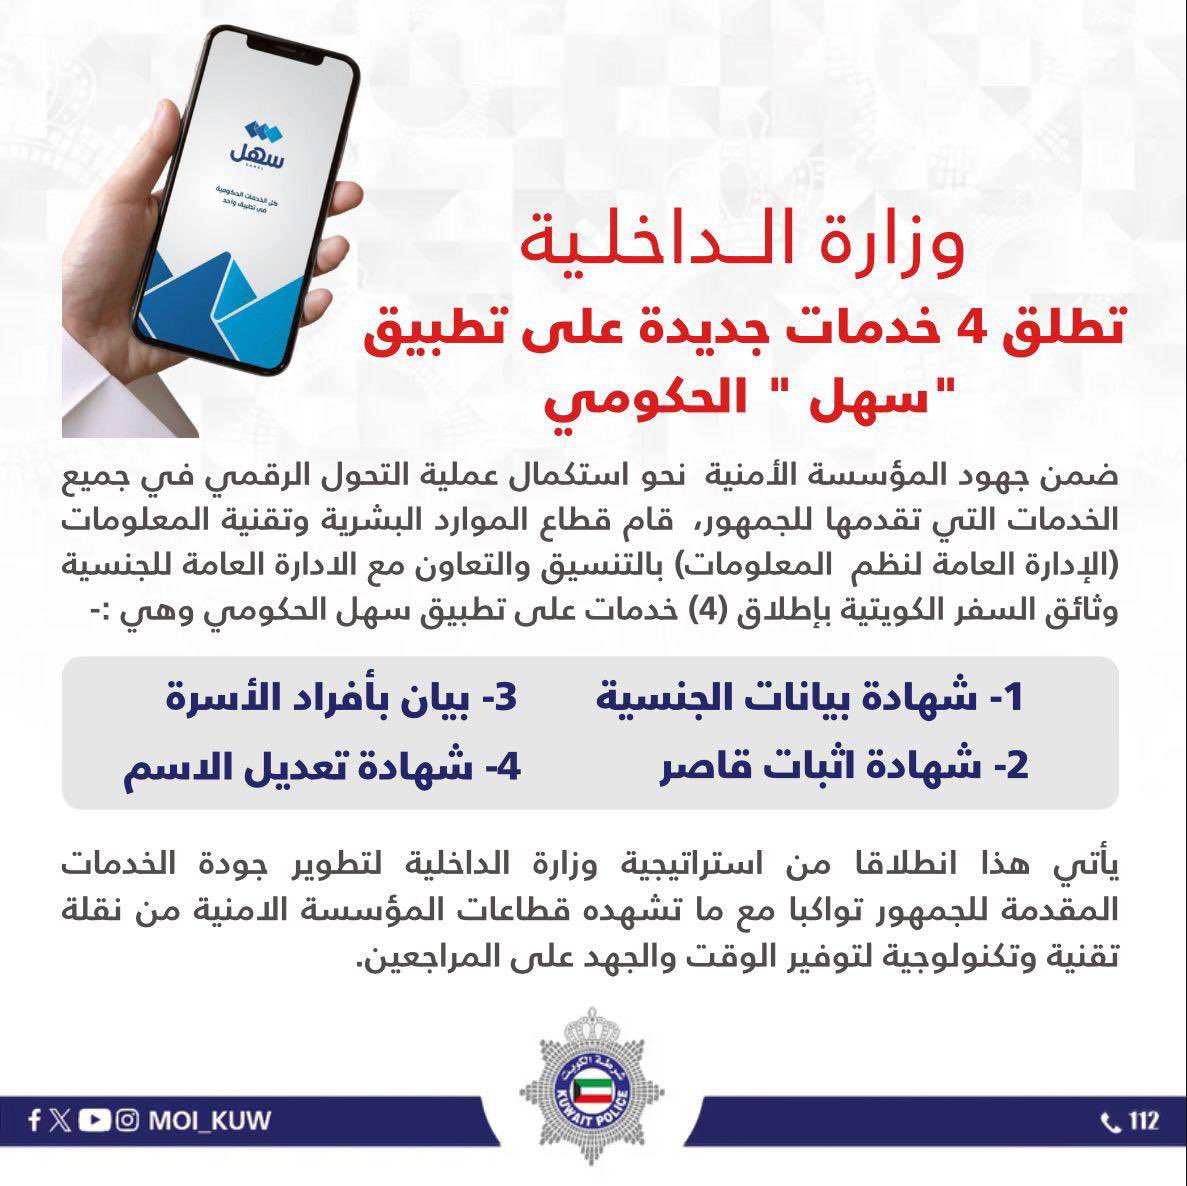 MoI Added Services to Sahel App